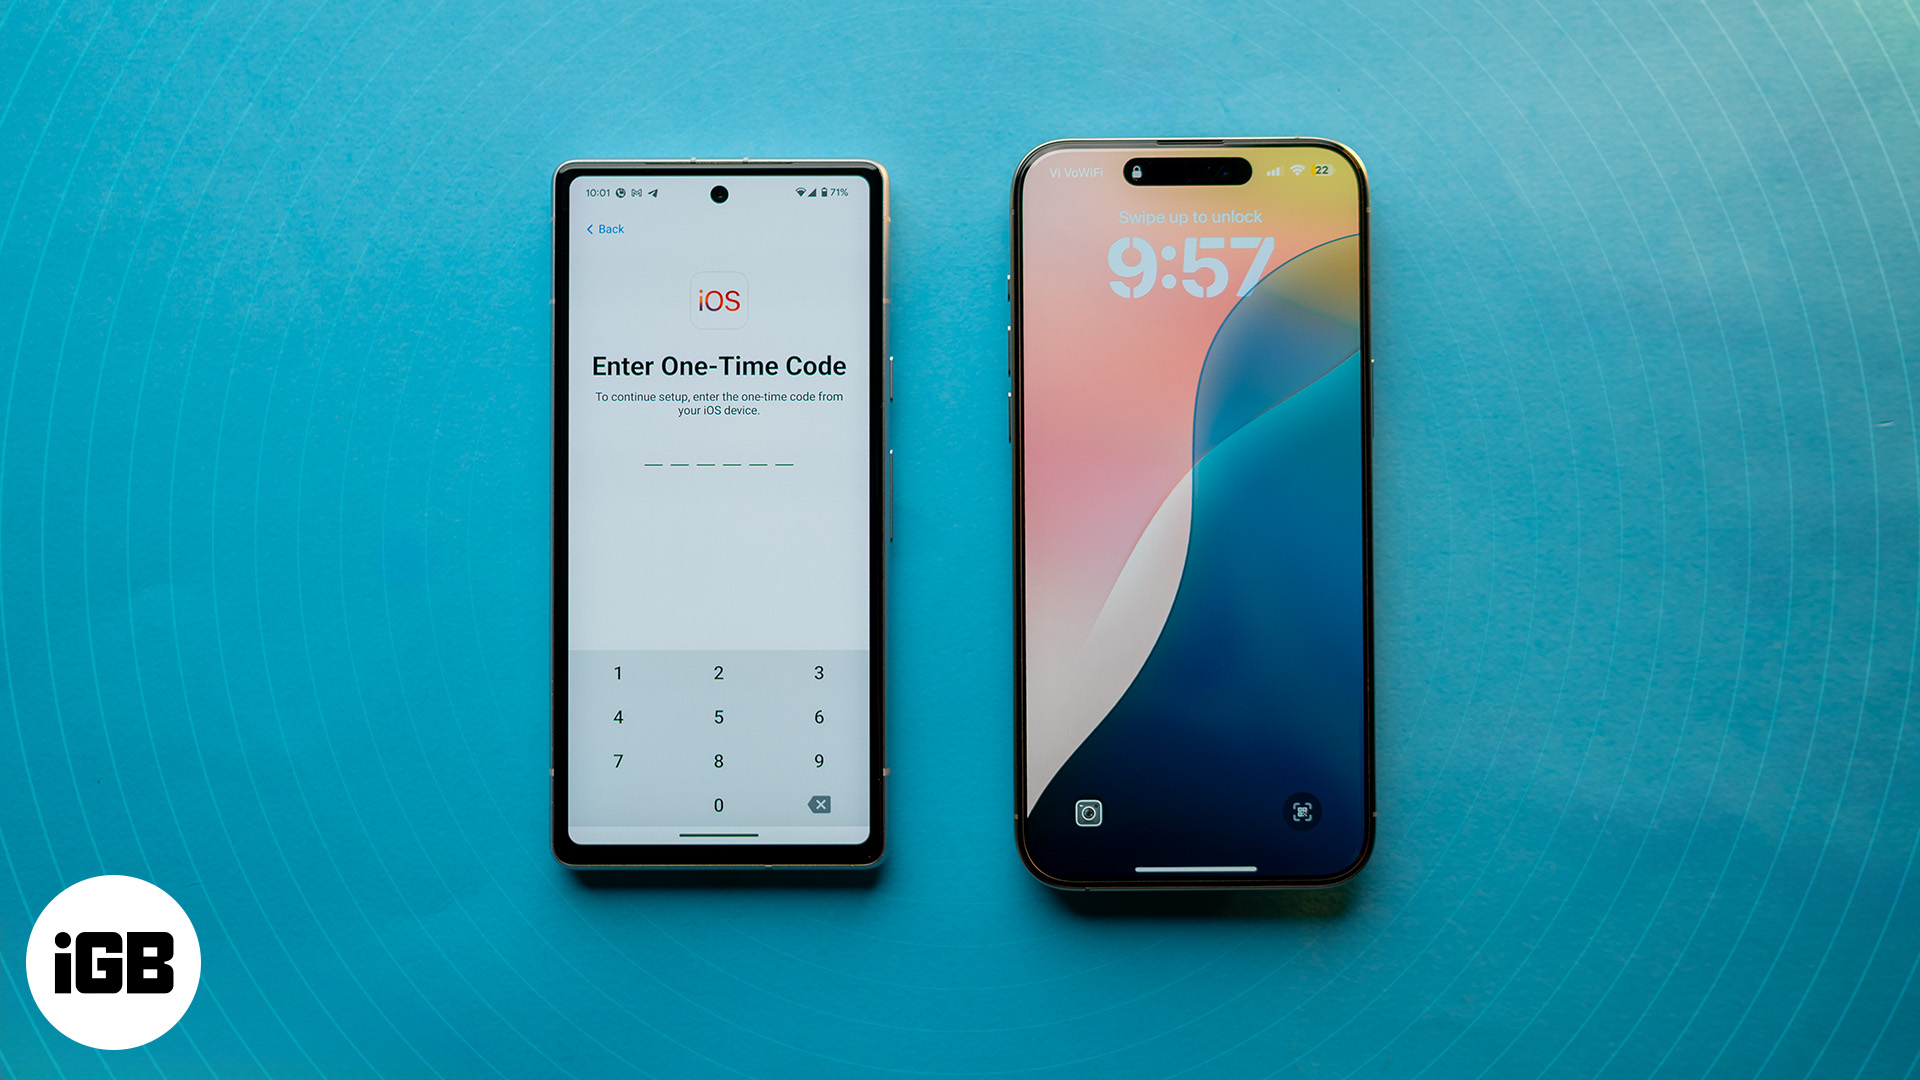 How to transfer data from an Android to an iPhone safely and securely